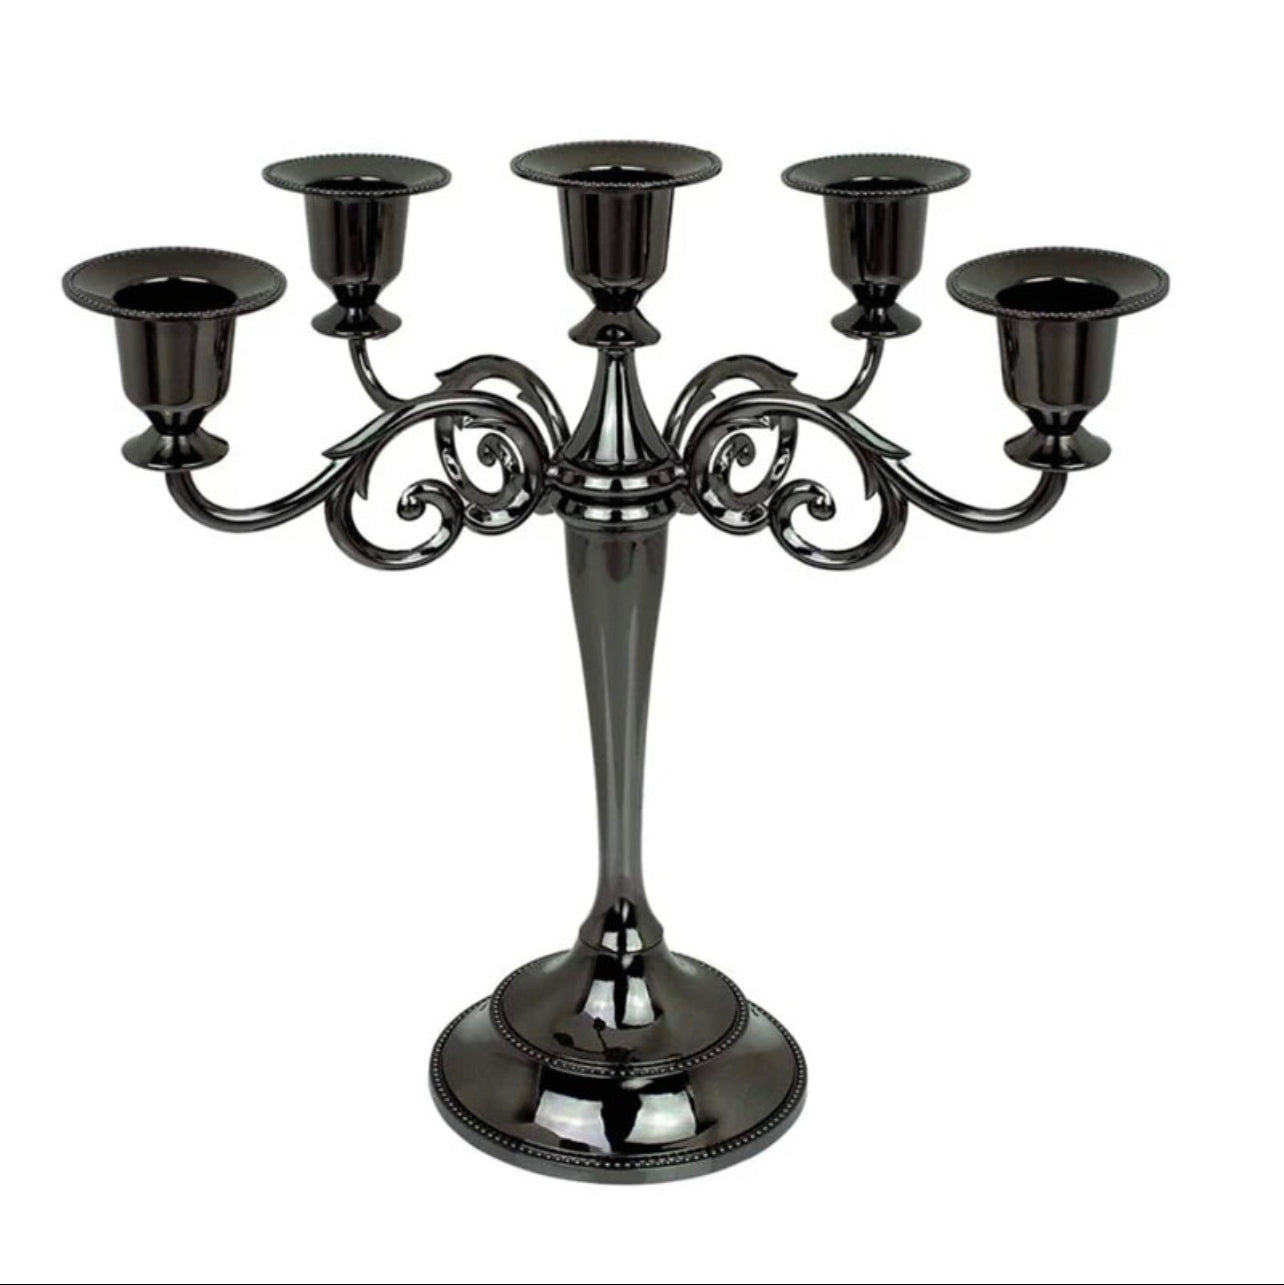 Gothic 5 arm ornate Candle holder